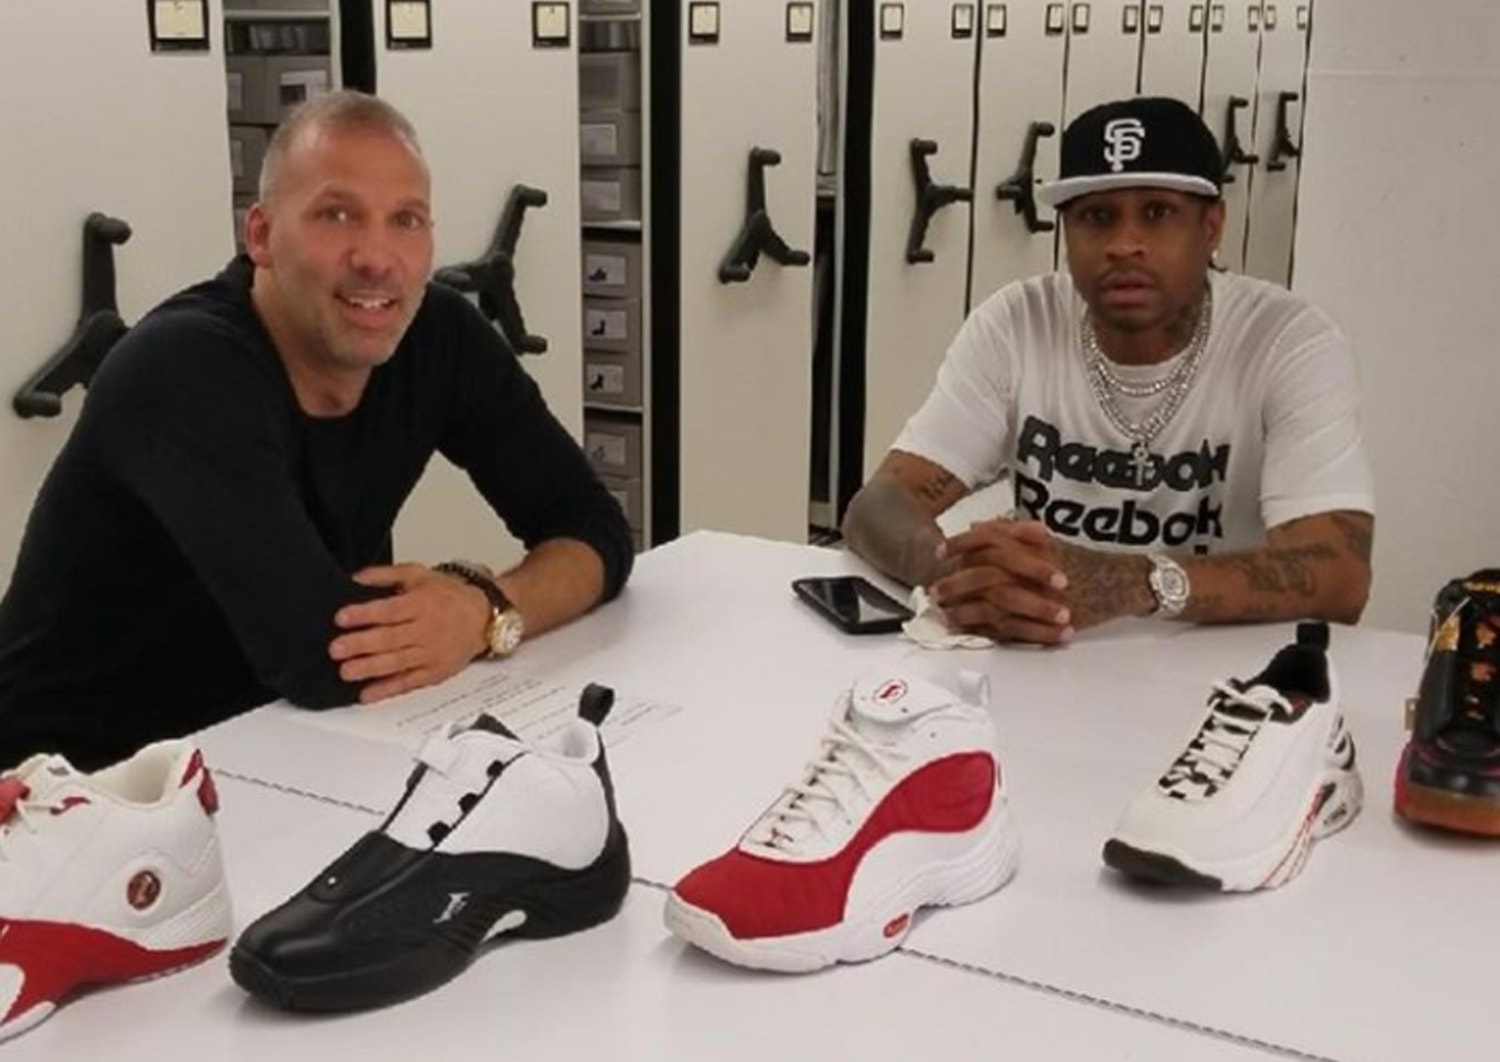 Allen Iverson and Reebok Bringing Back I3 Legacy Collection classic models like the Reebok Question Mid and Reebok Answer IV sneaker releases